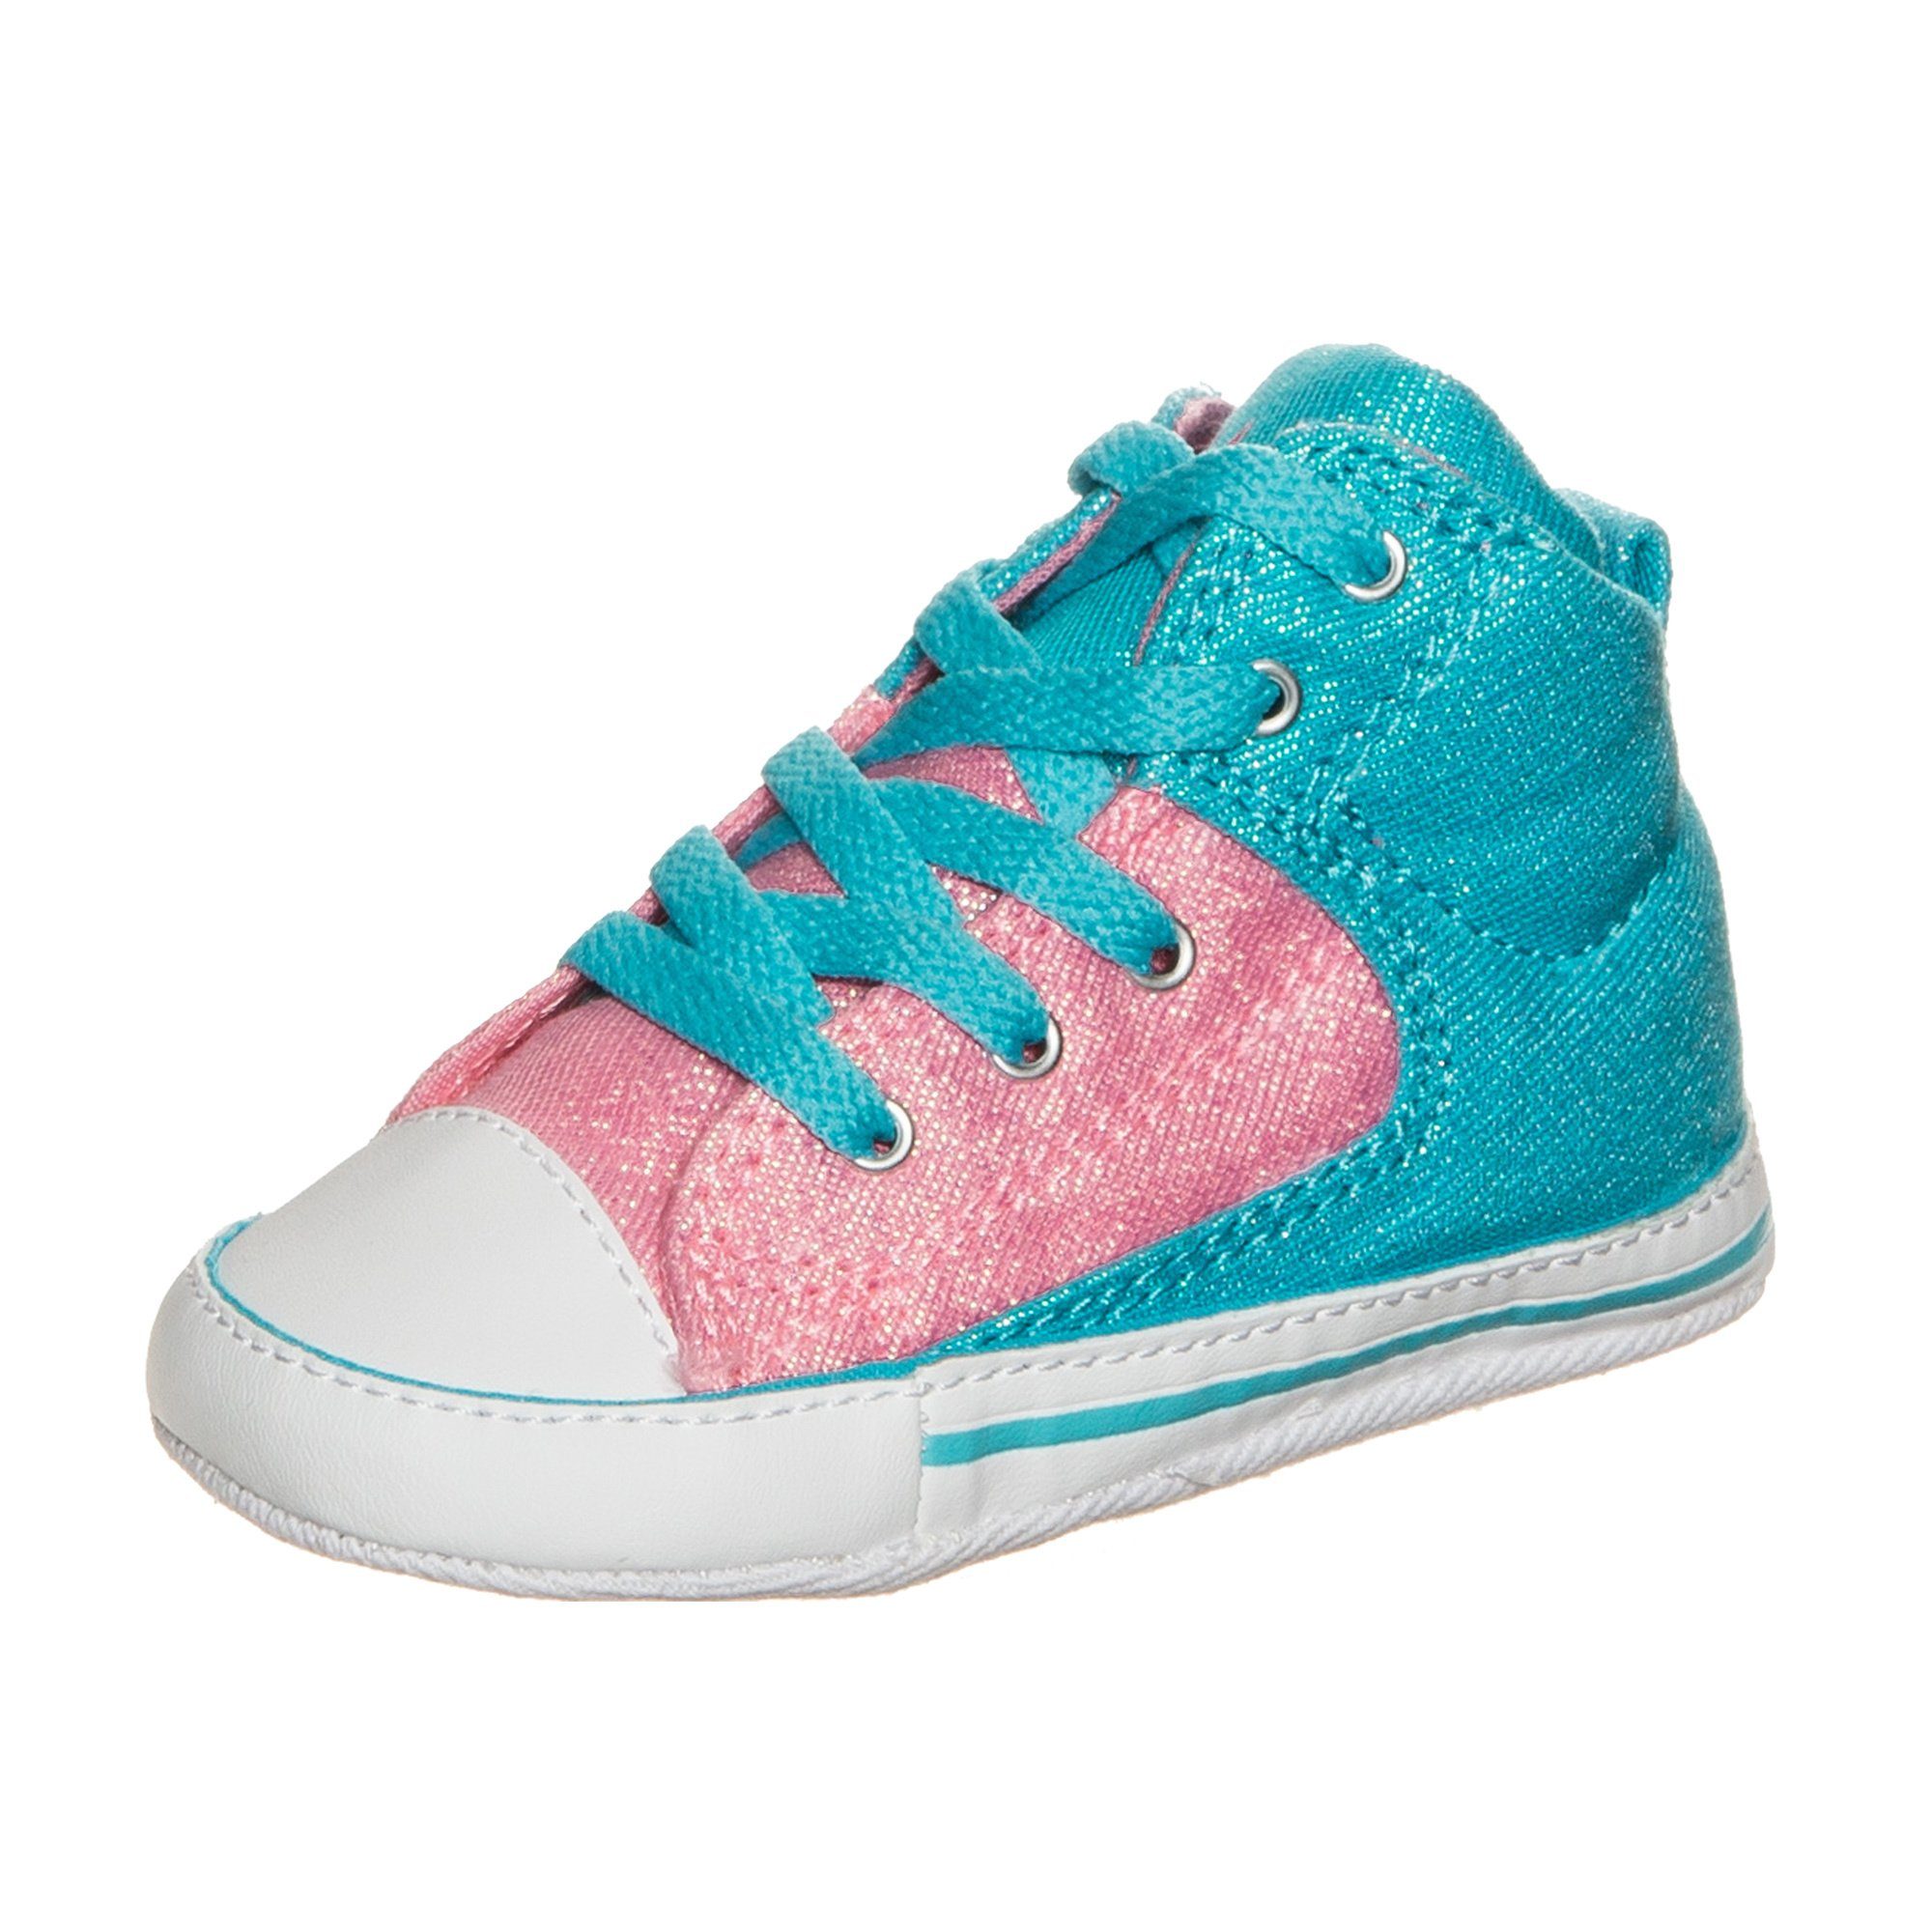 Otto - Converse NU 15% KORTING: Converse Chuck Taylor First Star High Street High sneakers voor baby's & peuters